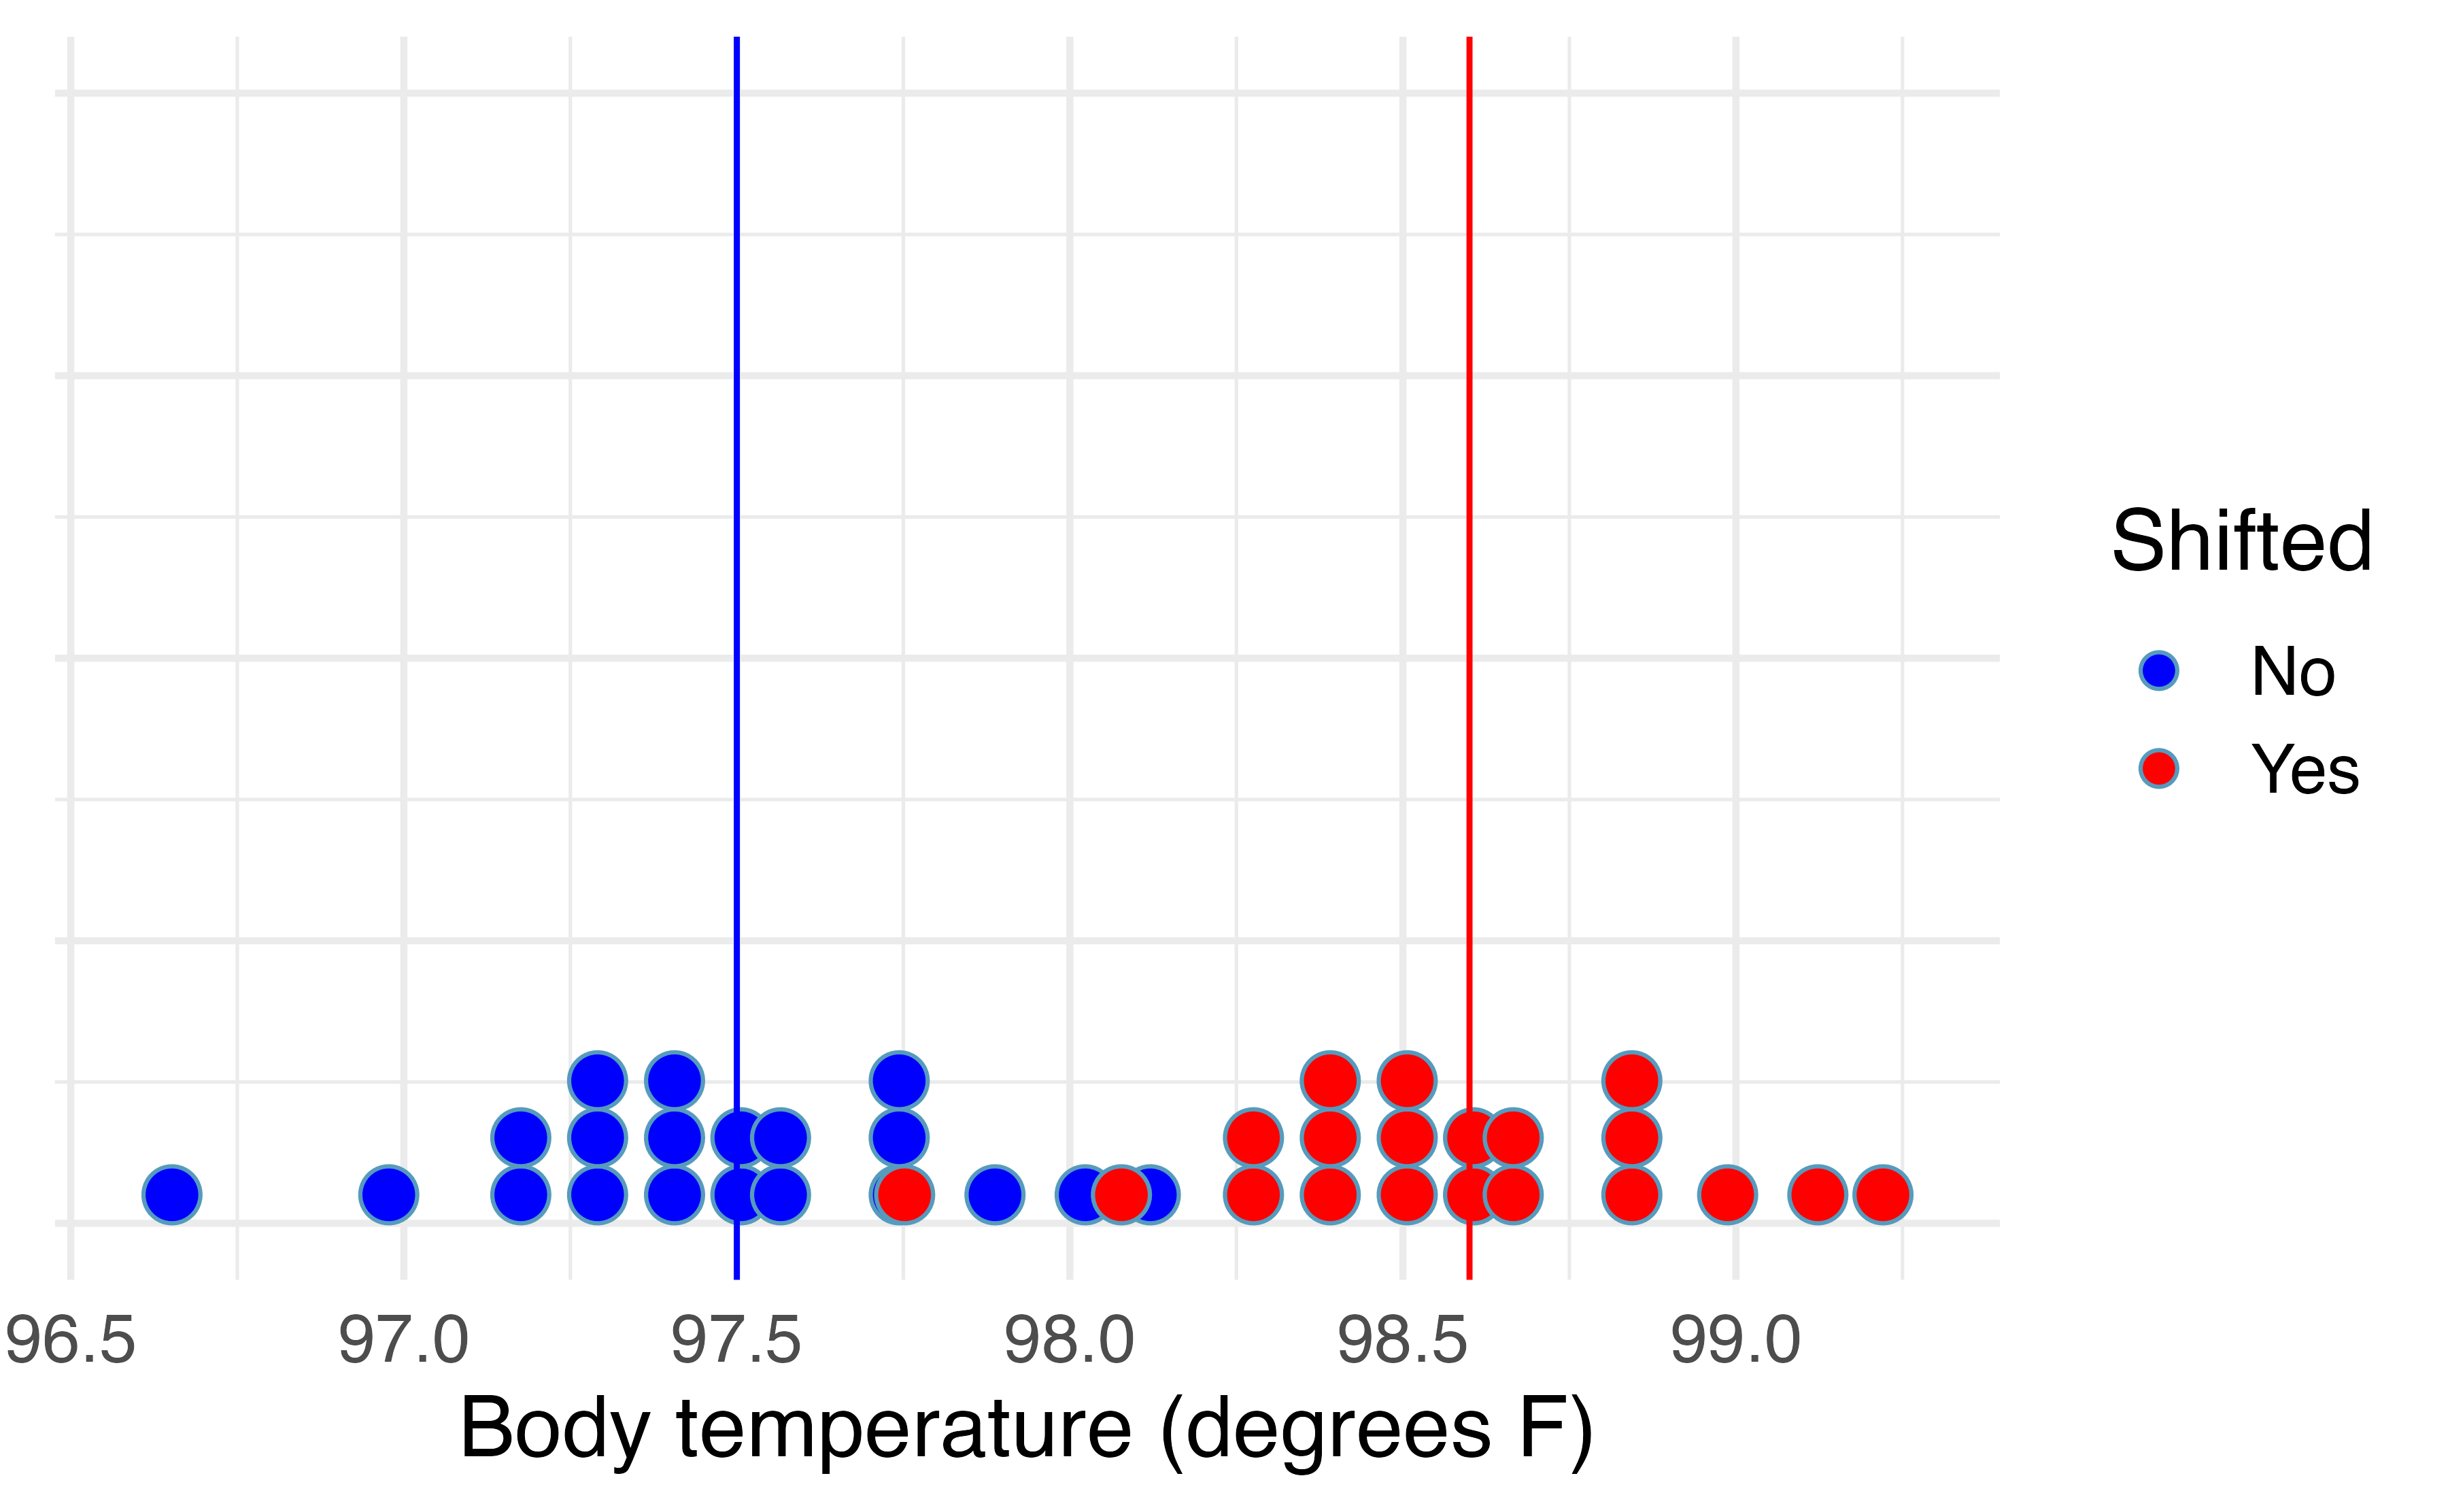 Distribution of body temperatures in a random sample of twenty Montana State University students (blue) and the shifted body temperatures (red), found by adding 1.1 degree F to each original body temperature.